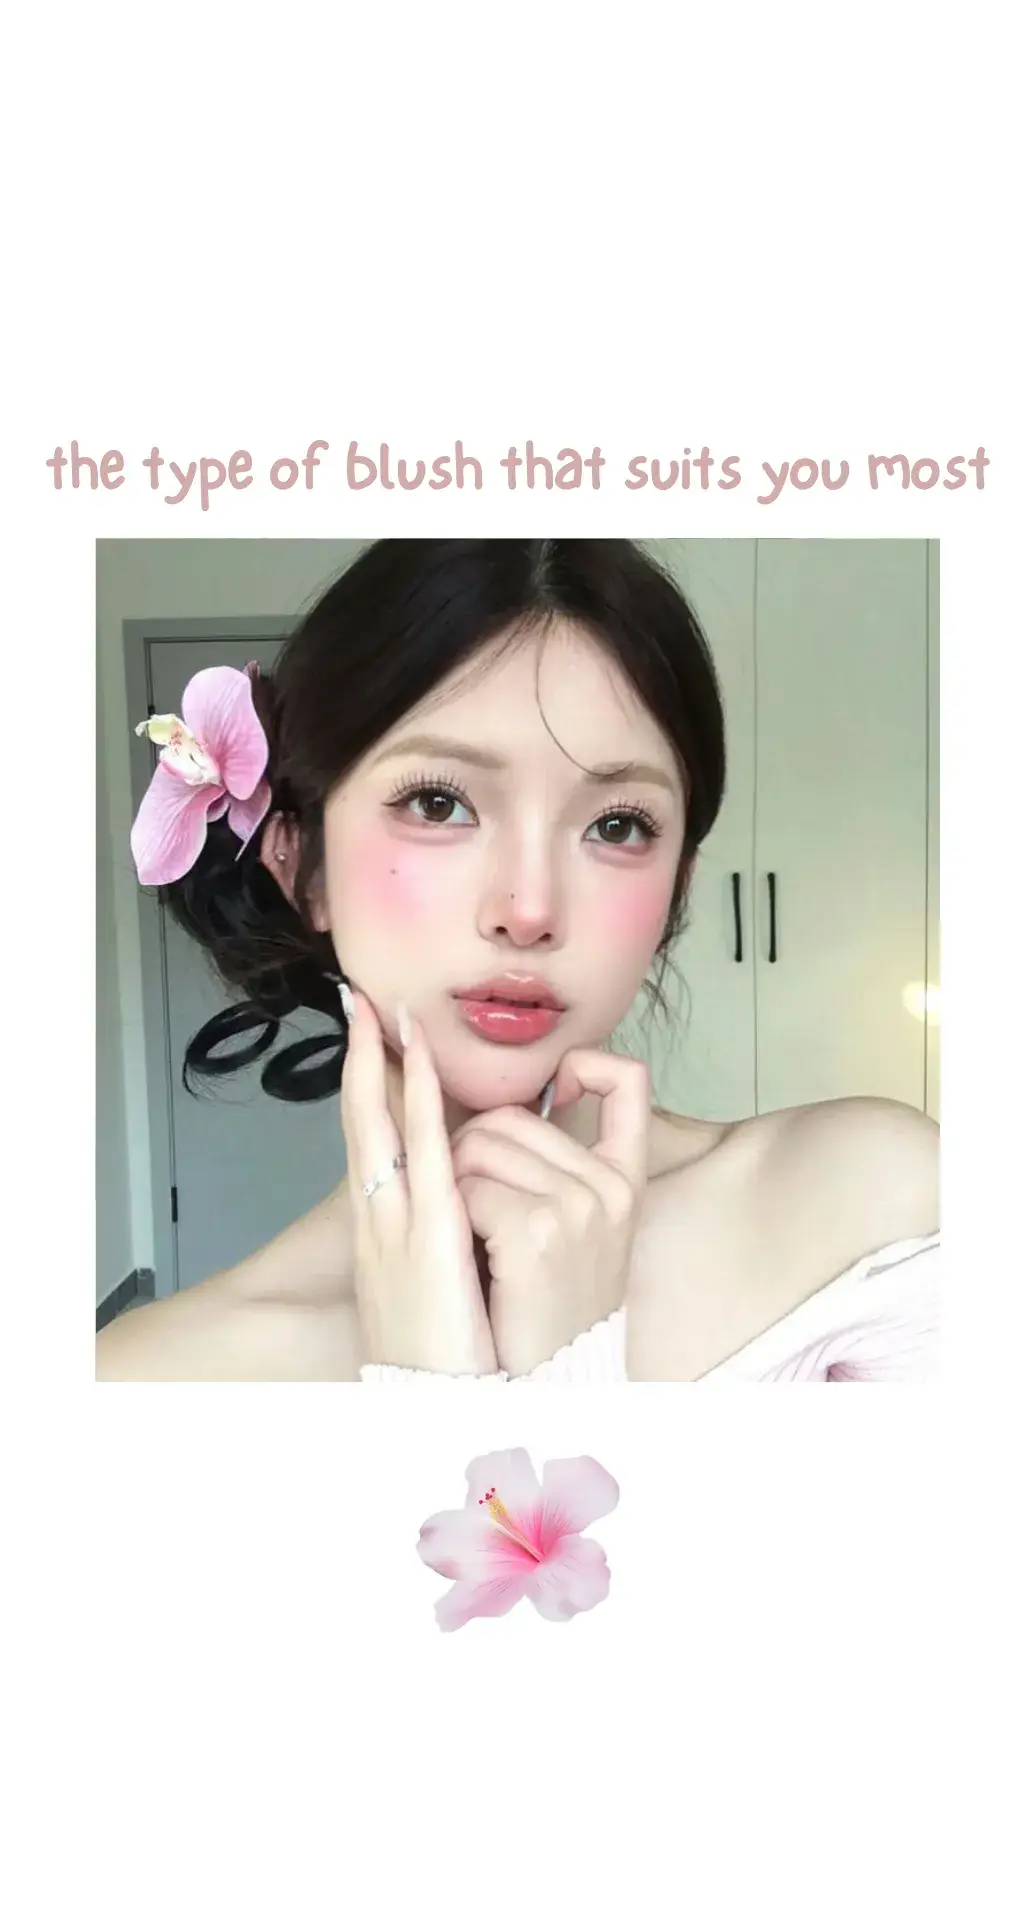 🌺:: type of blush according to your face shape #blush #makeup #makeuptips #slideshow #beautytips #girltips #prettygirls #quiz #GlowUp #glowupchallenge #glowuptips #fyi #fyp #fypシ #fyppage #foryoupage 